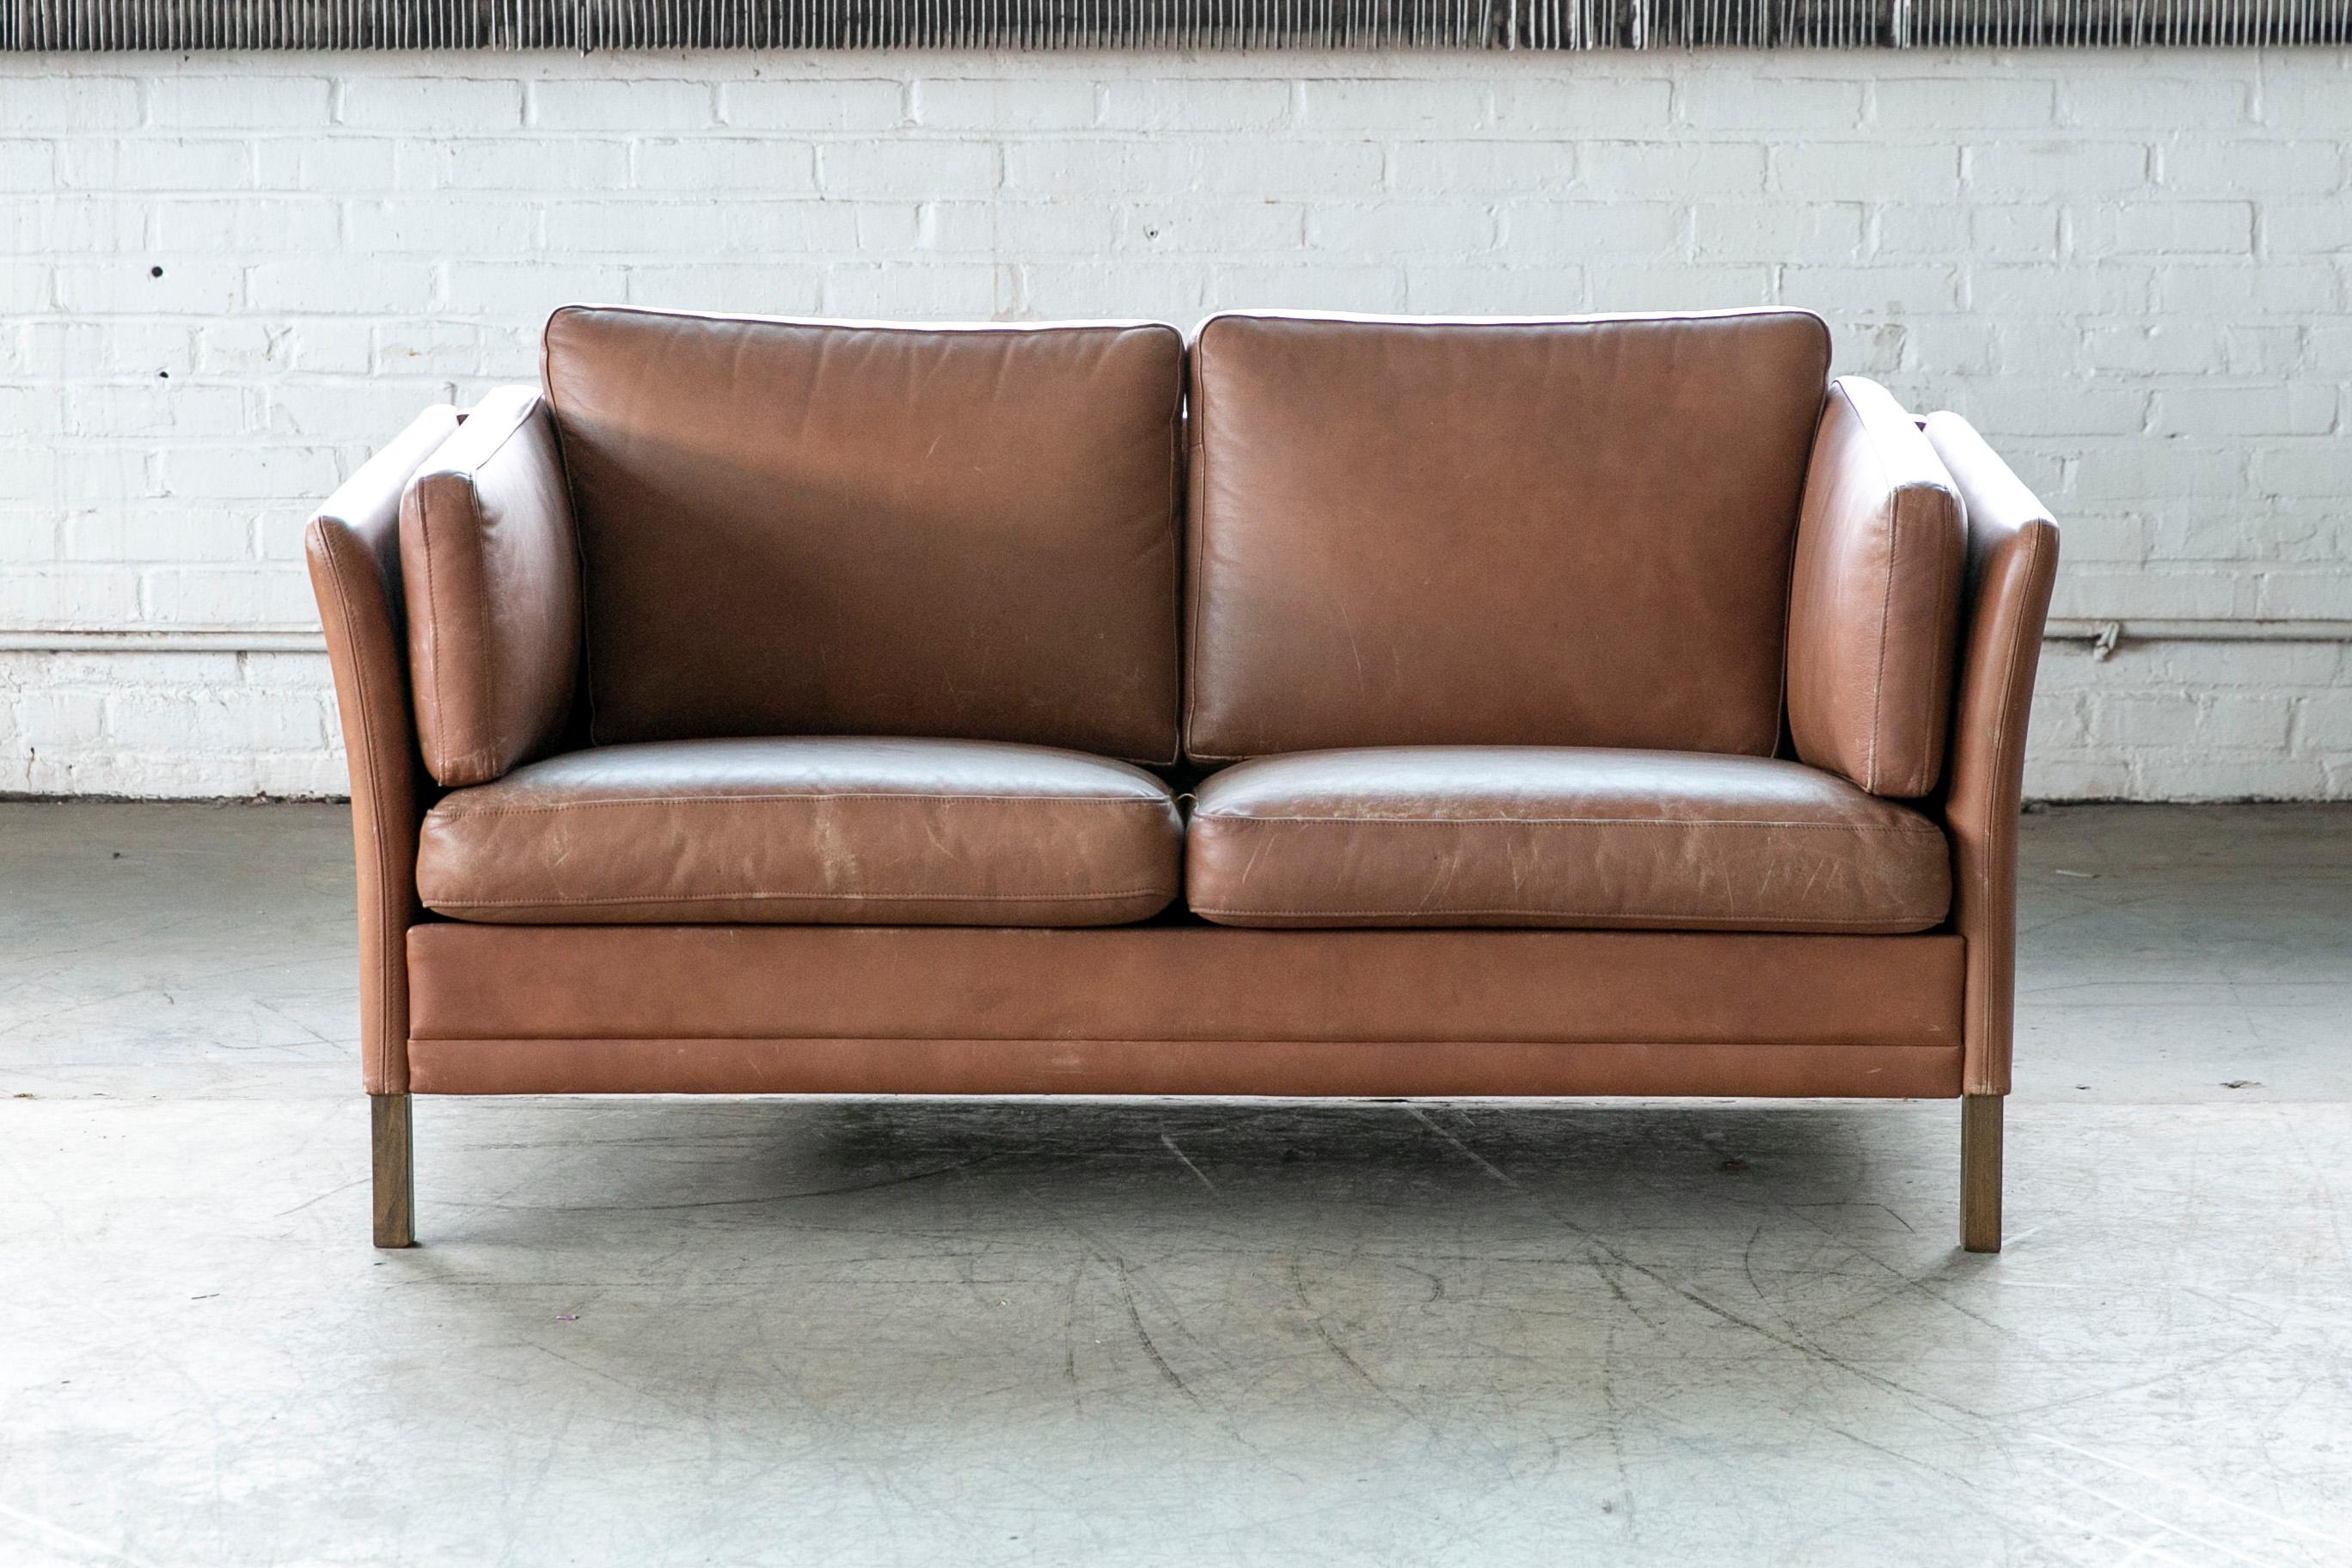 Mid-Century Modern Beautiful Two-Seat Cognac Colored Leather Sofa Model MH2225 by Mogens Hansen